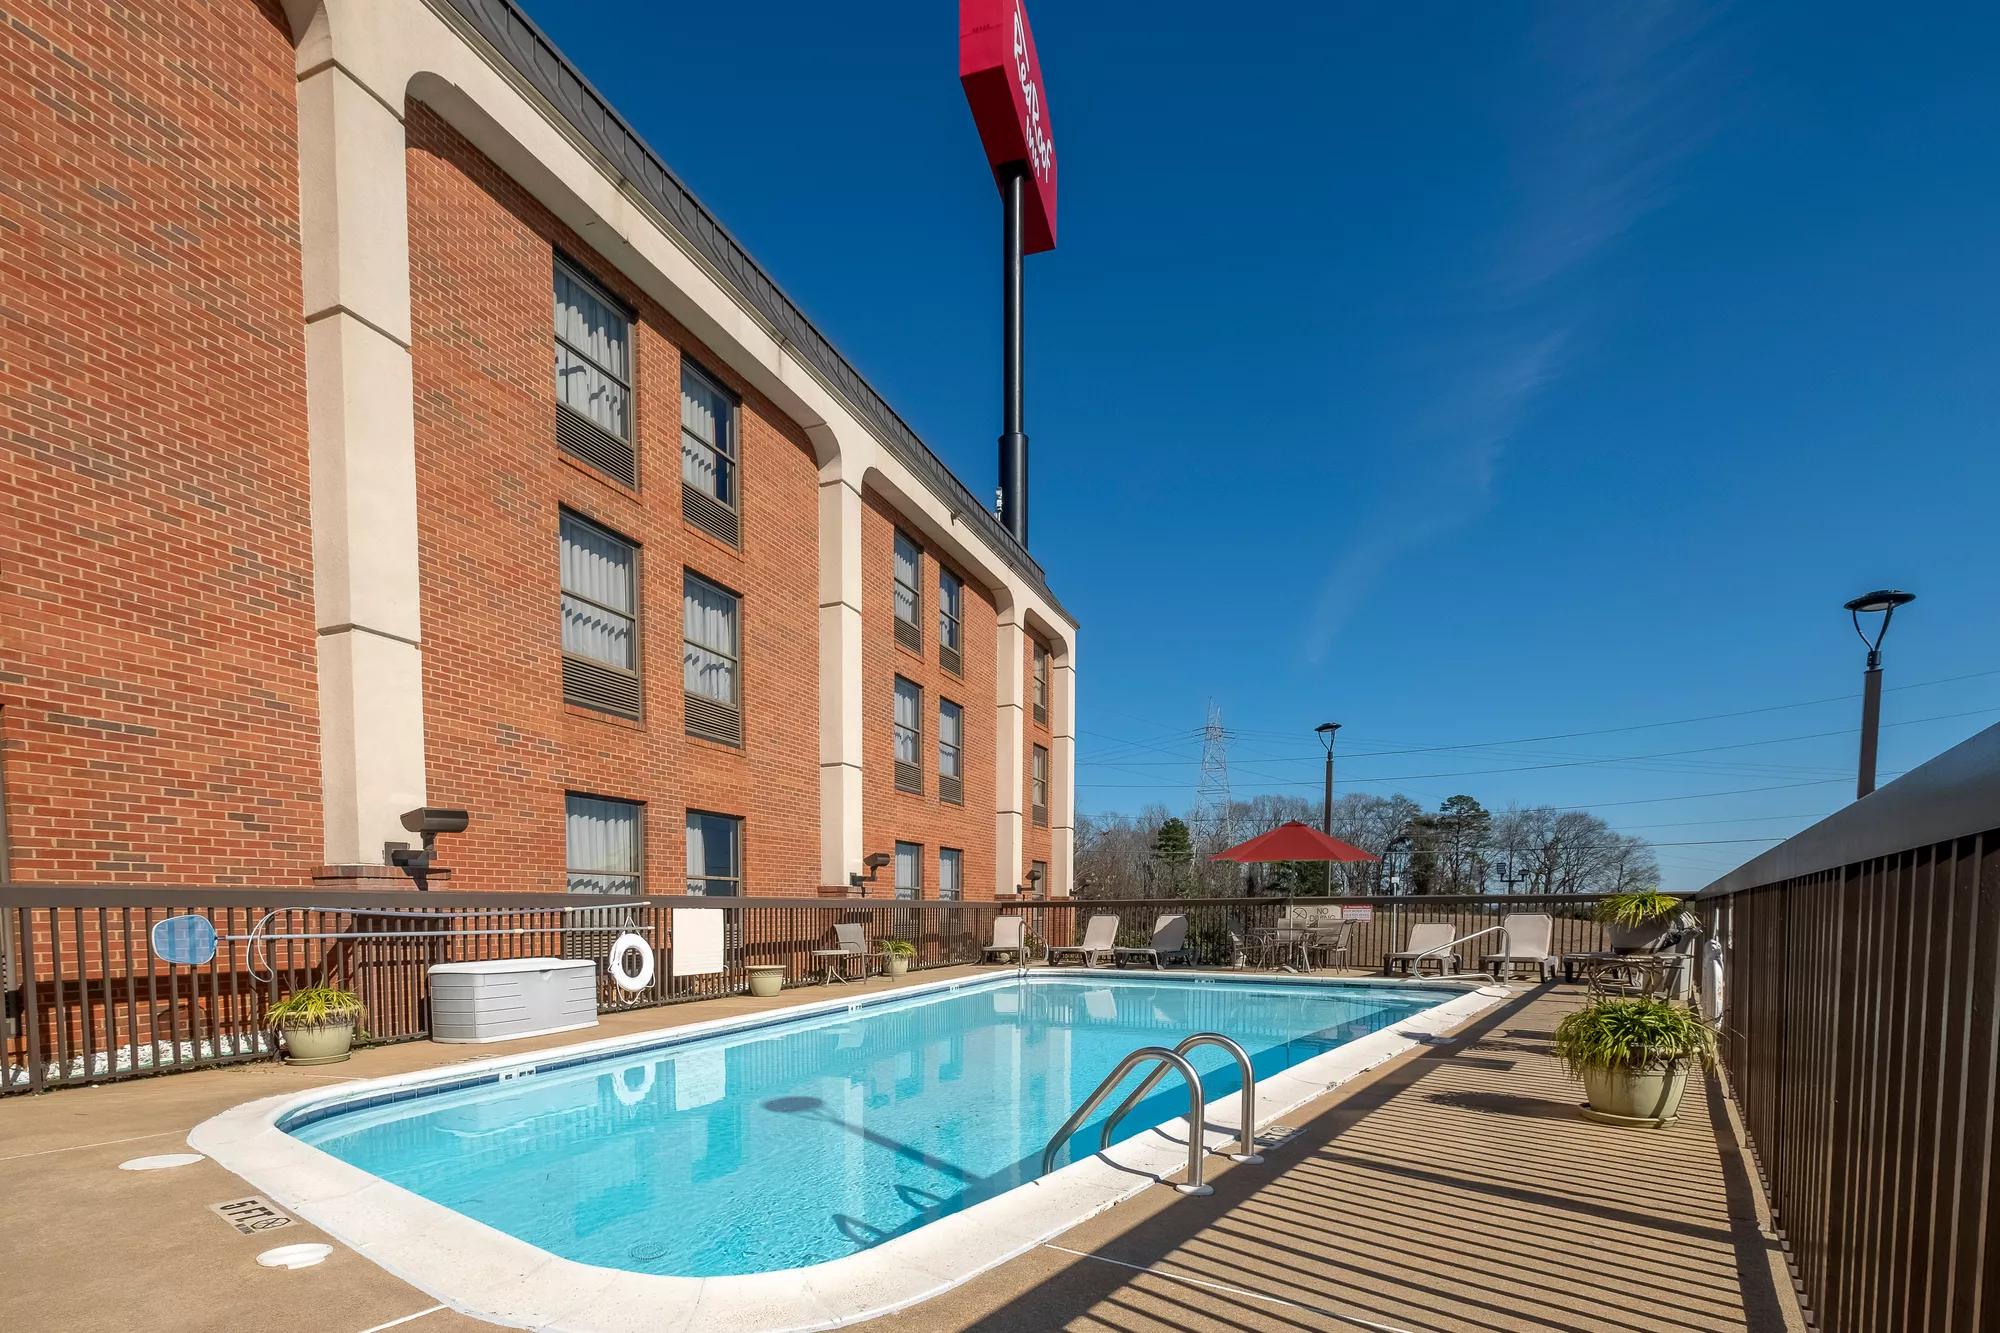 Red Roof Inn Prattville Outdoor Swimming Pool Image Details